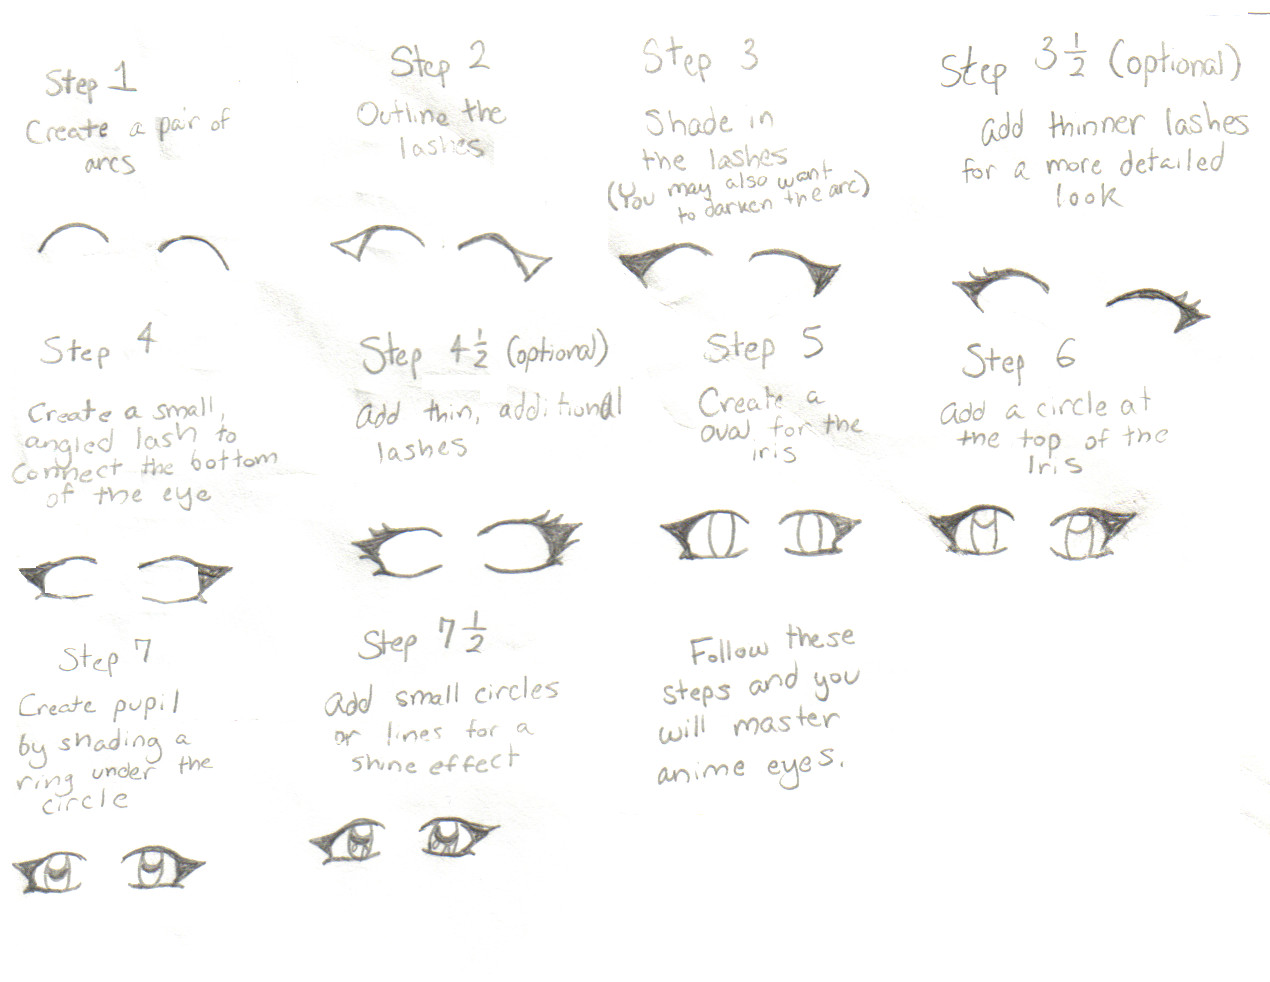 how to draw female anime eyes step by step